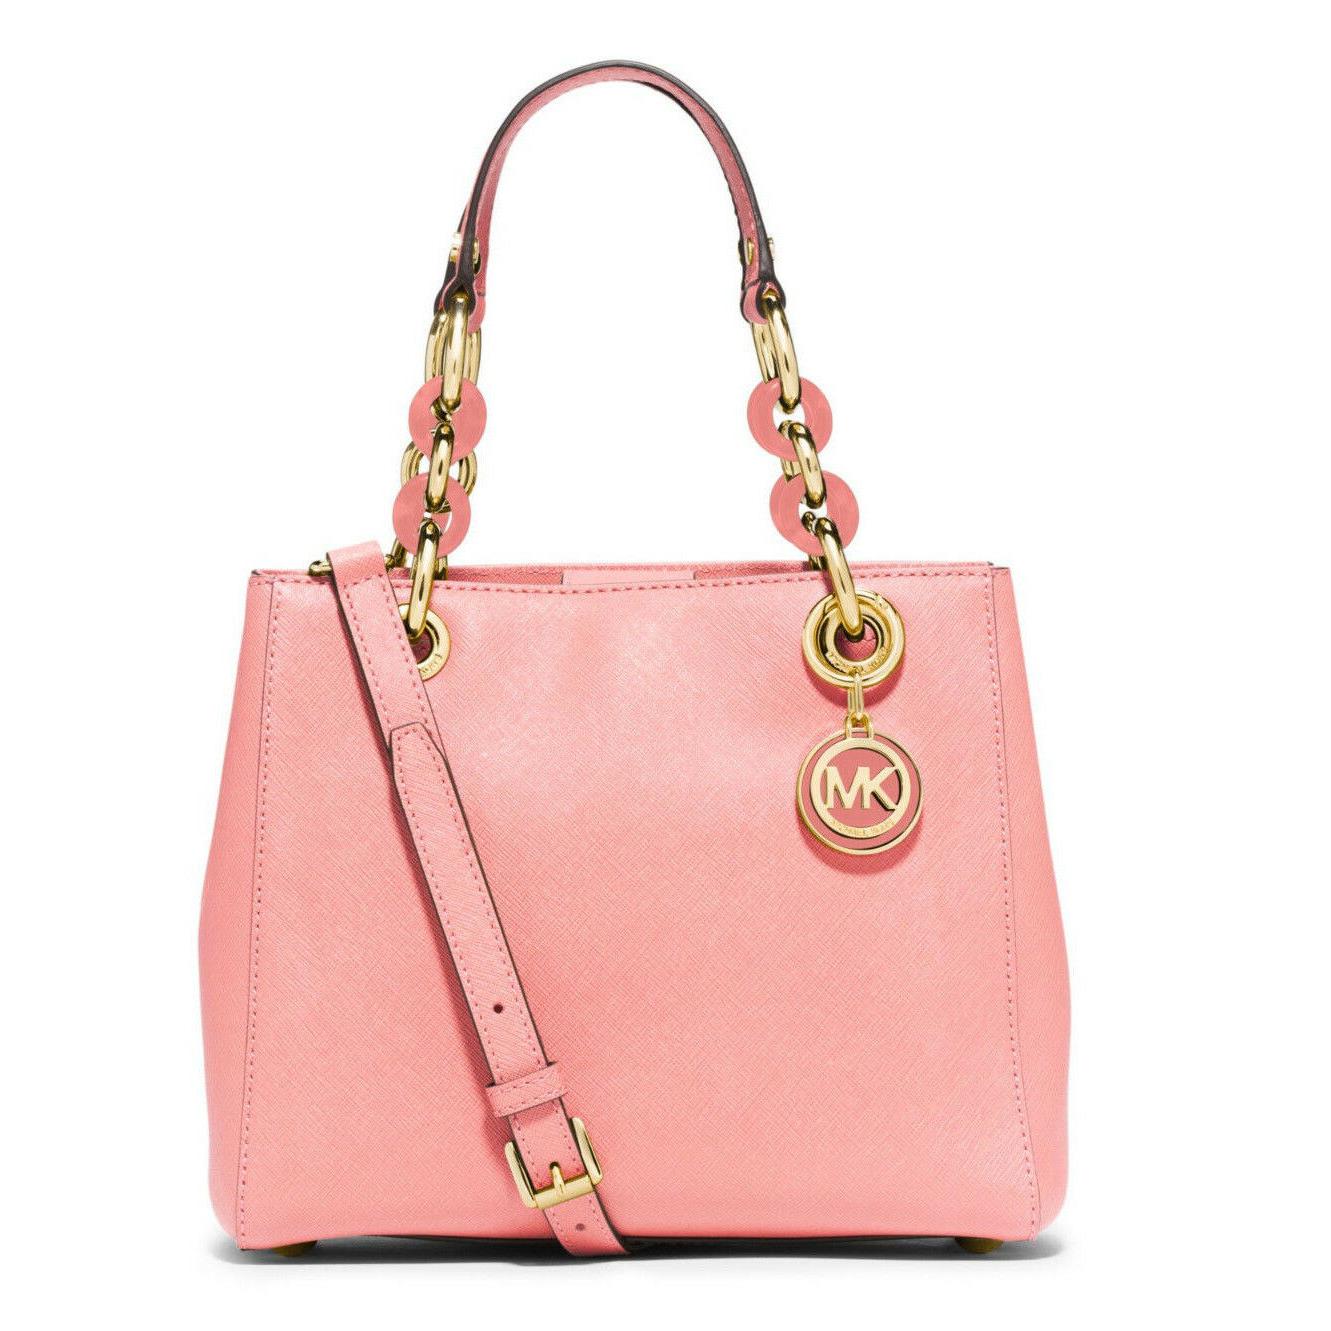 Michael Kors Cynthia Small Satchel Pale Pink - Pale Pink Exterior